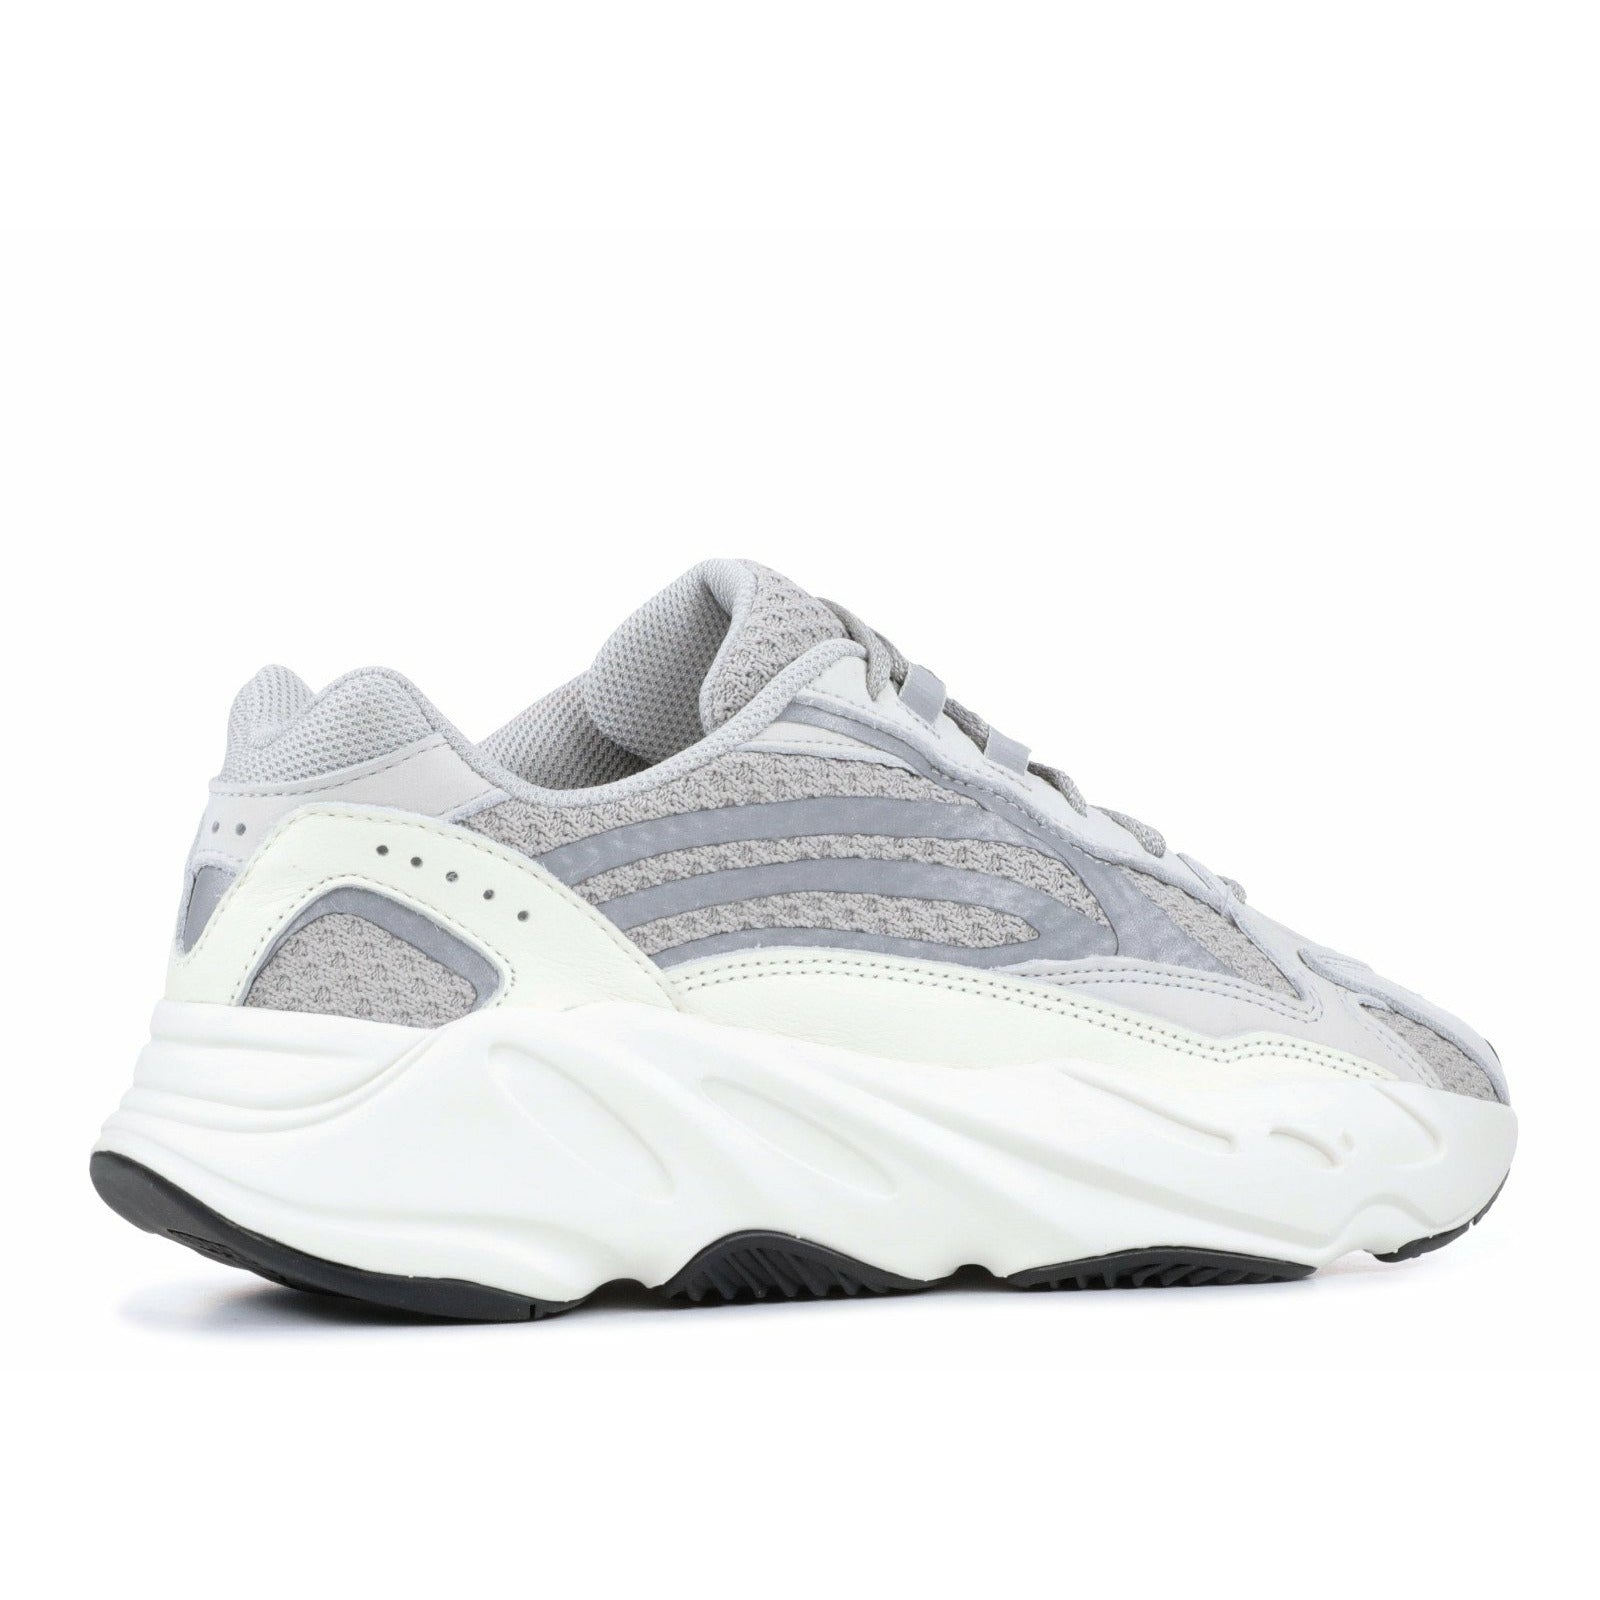 Adidas-Yeezy Boost 700 V2 "Static"-Yeezy Boost 700 V2 "Static" Sneakers
Product code: EF2829 Colour: Static/Static/Static Year of release: 2019
| MrSneaker is Europe's number 1 exclusive sneaker store.-mrsneaker